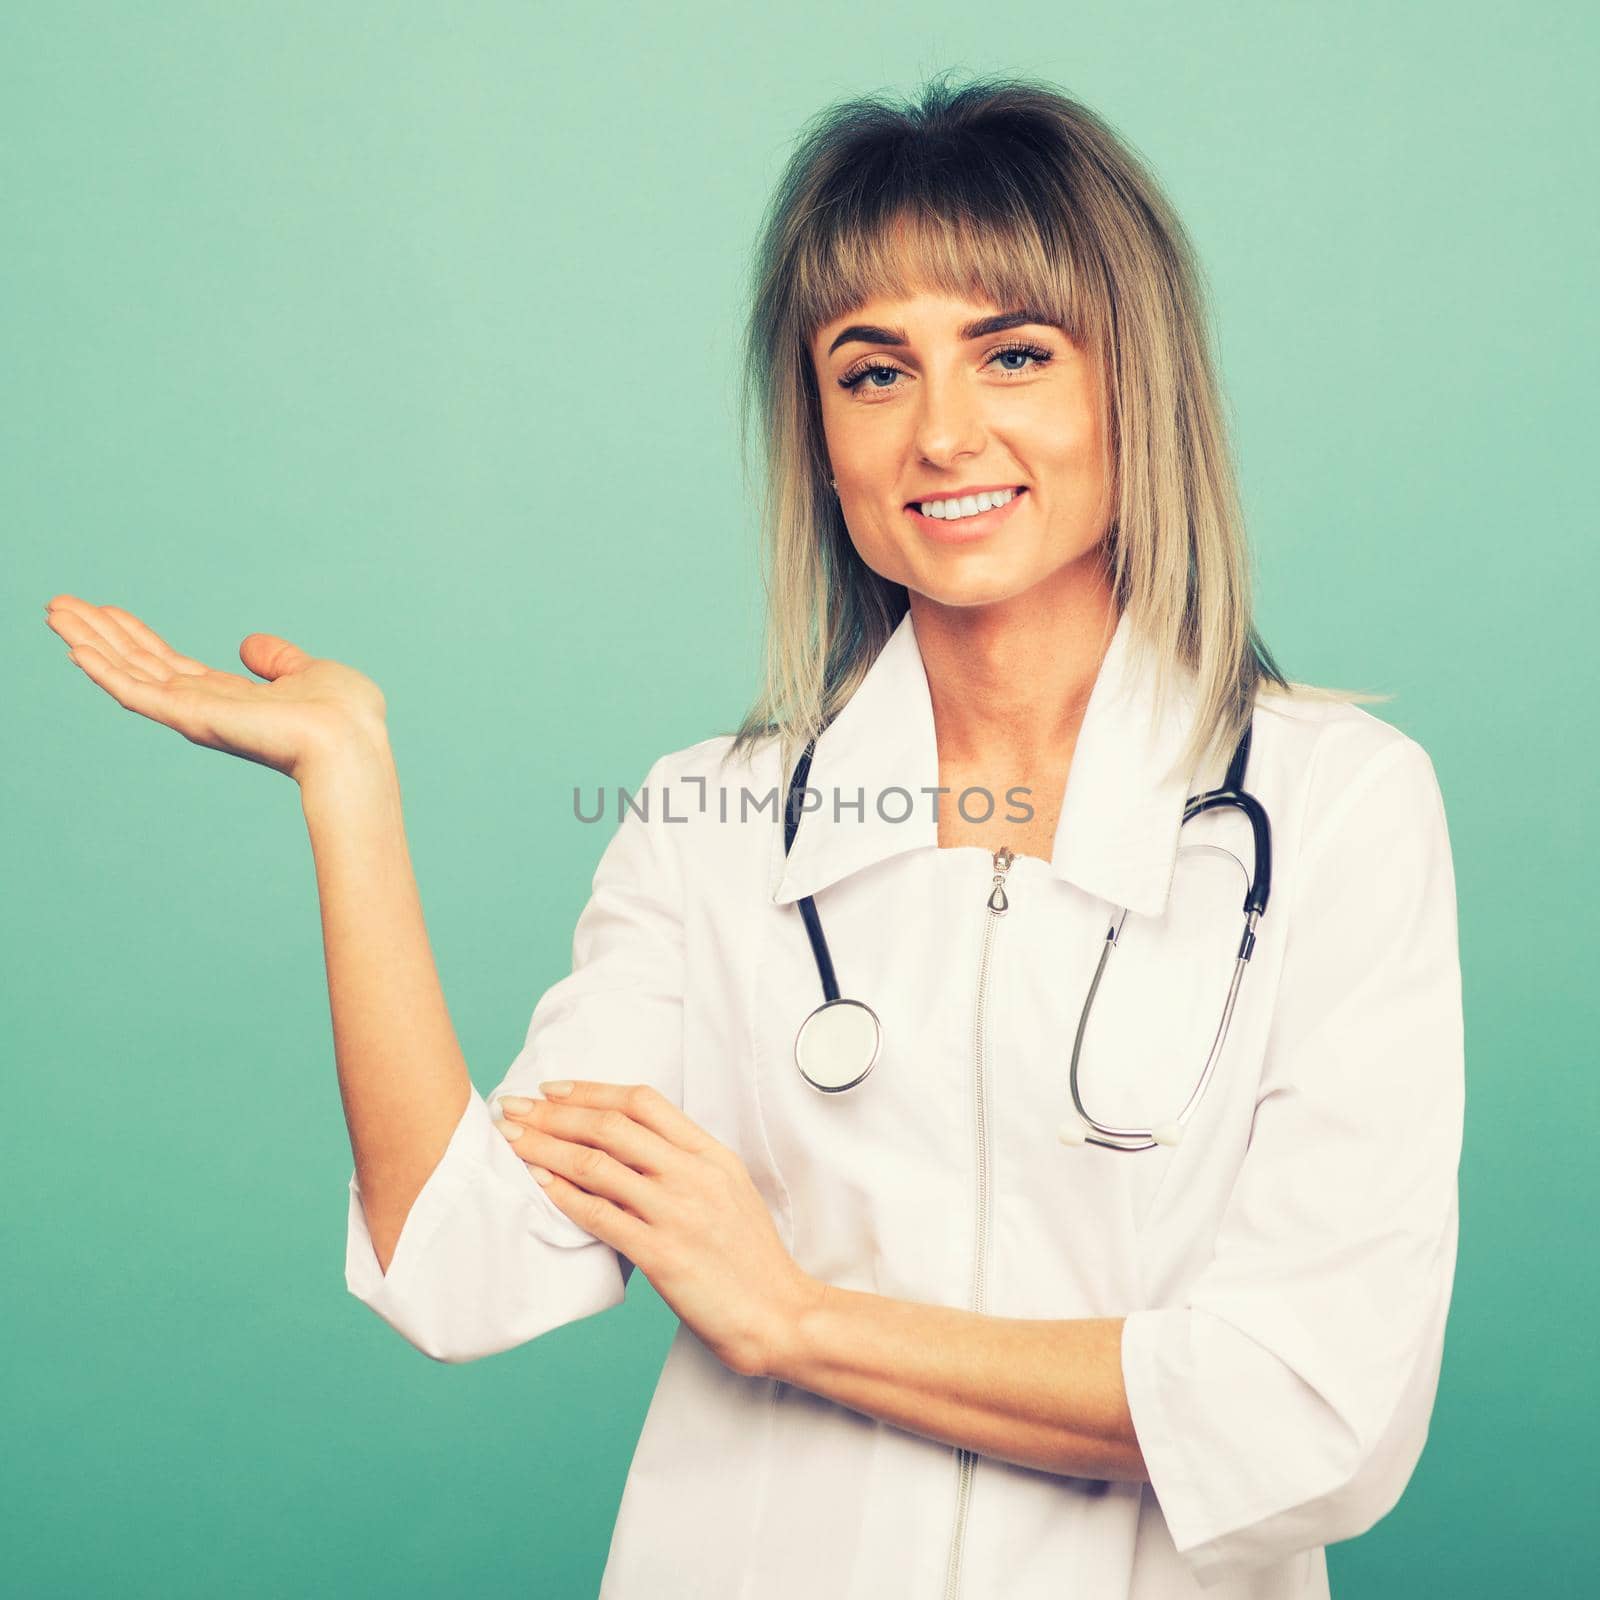 Smiling young female doctor with a stethoscope shows something on the palm by zartarn